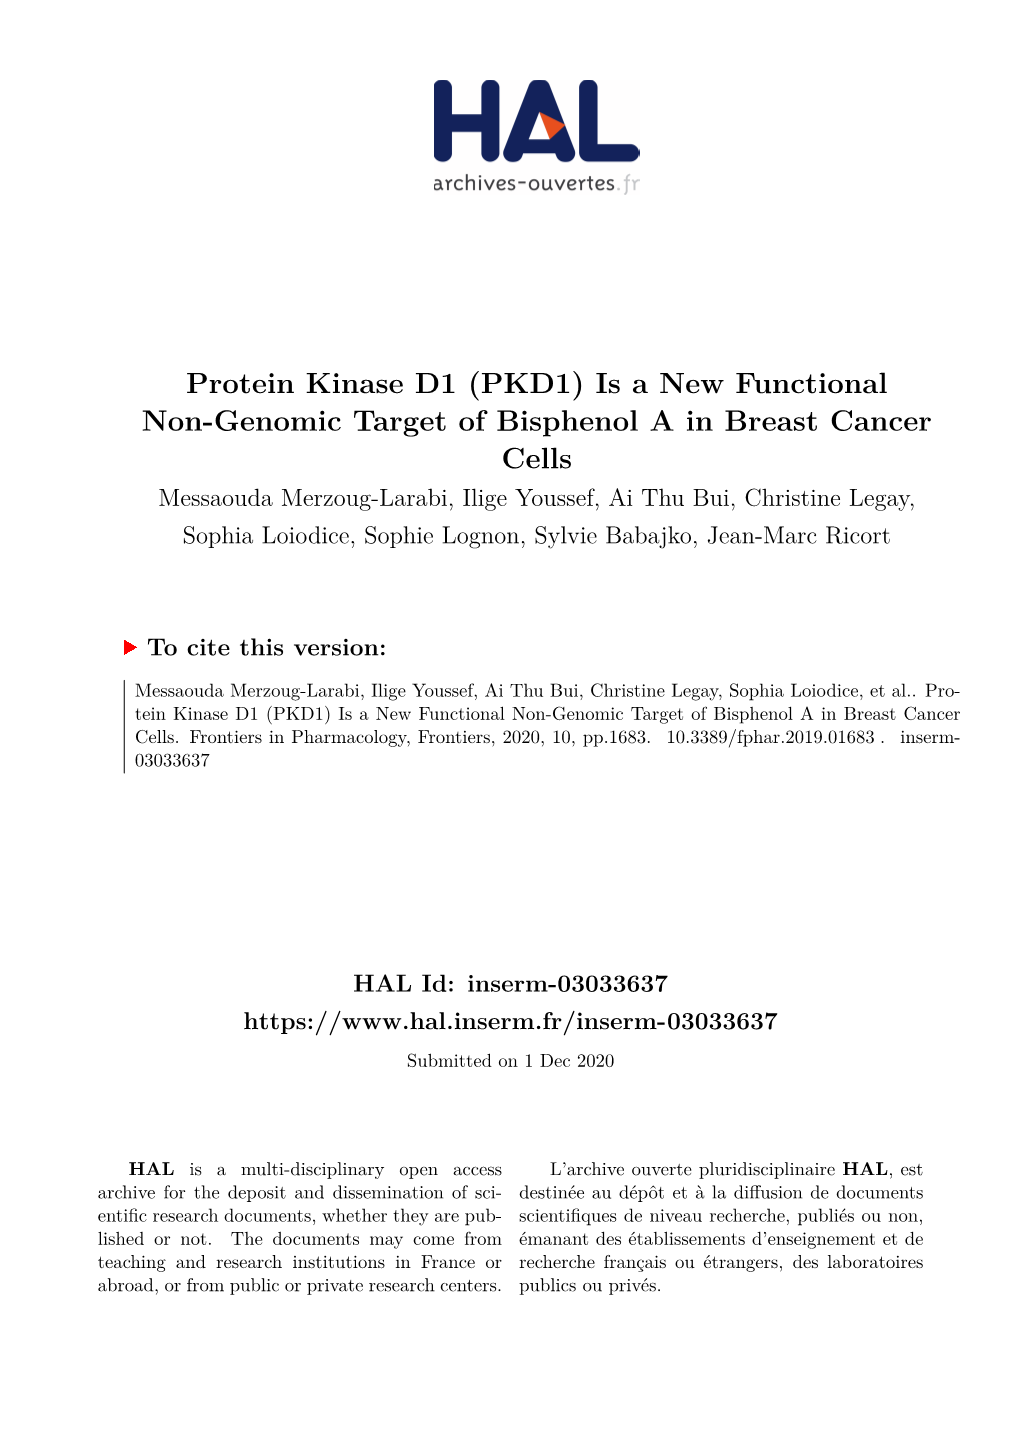 Protein Kinase D1 (PKD1) Is a New Functional Non-Genomic Target Of